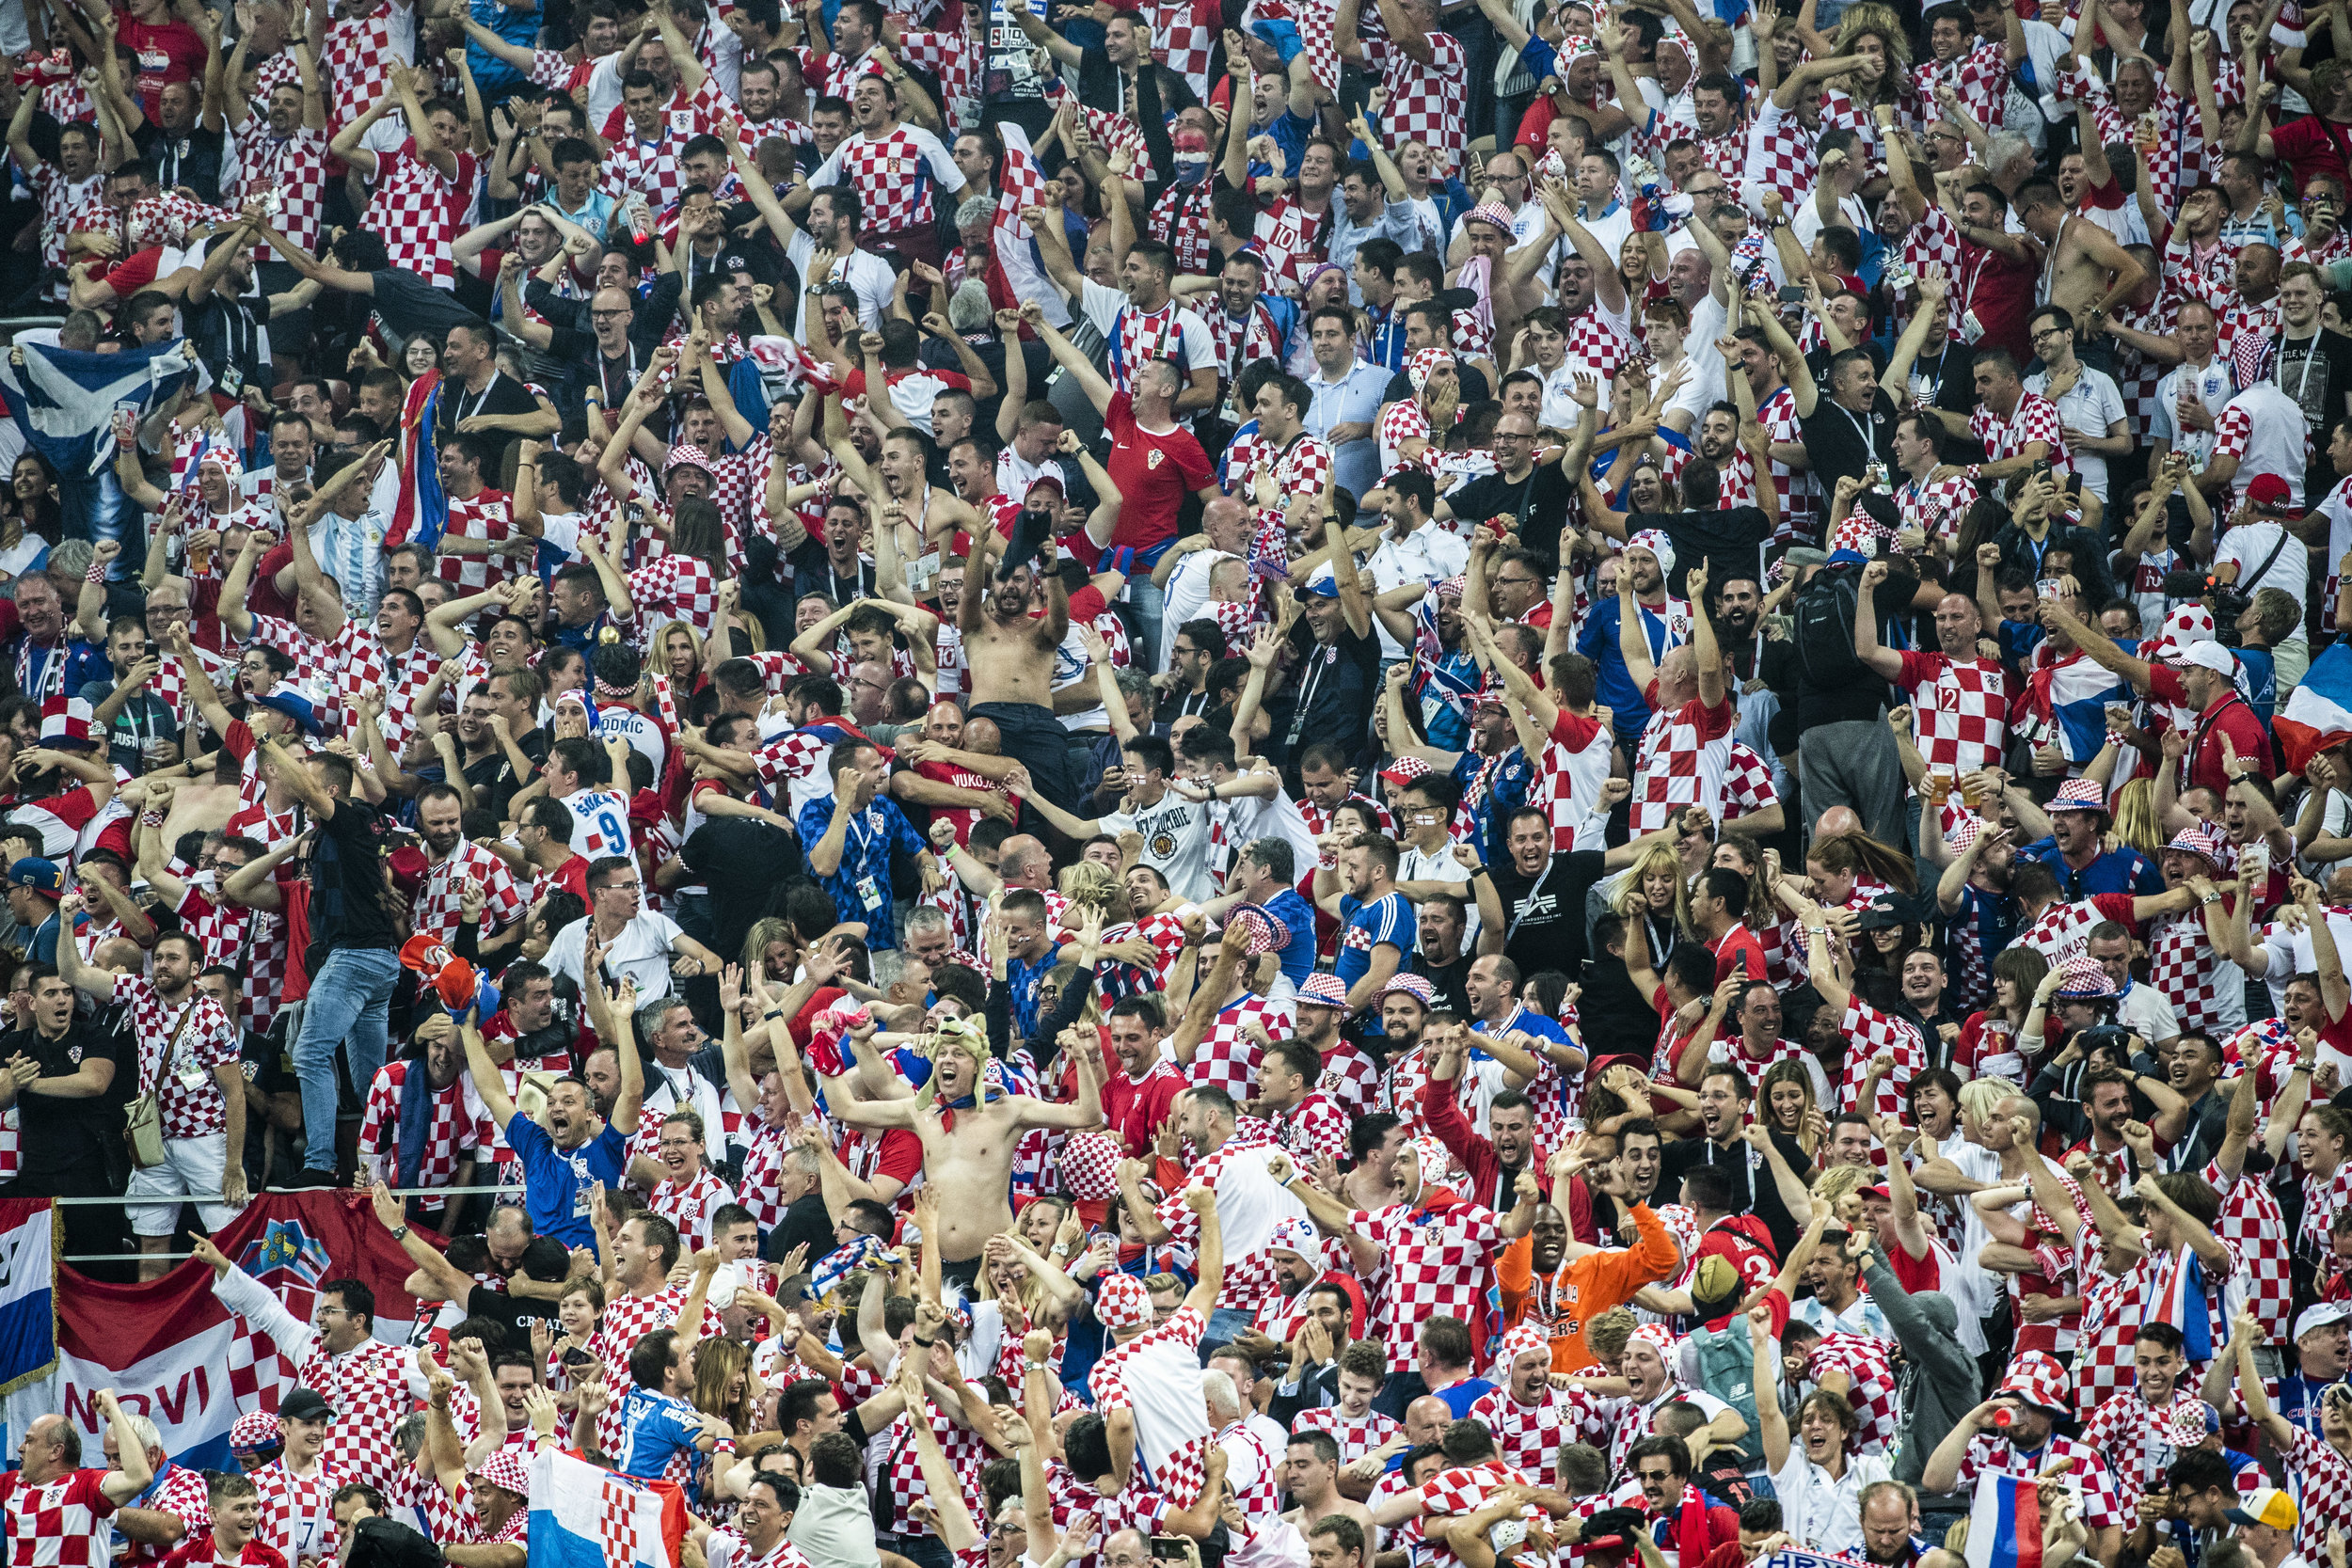  Croatians cheer as their team continues to attack after scoring a late goal during additional time in a semifinal game against England in Moscow 